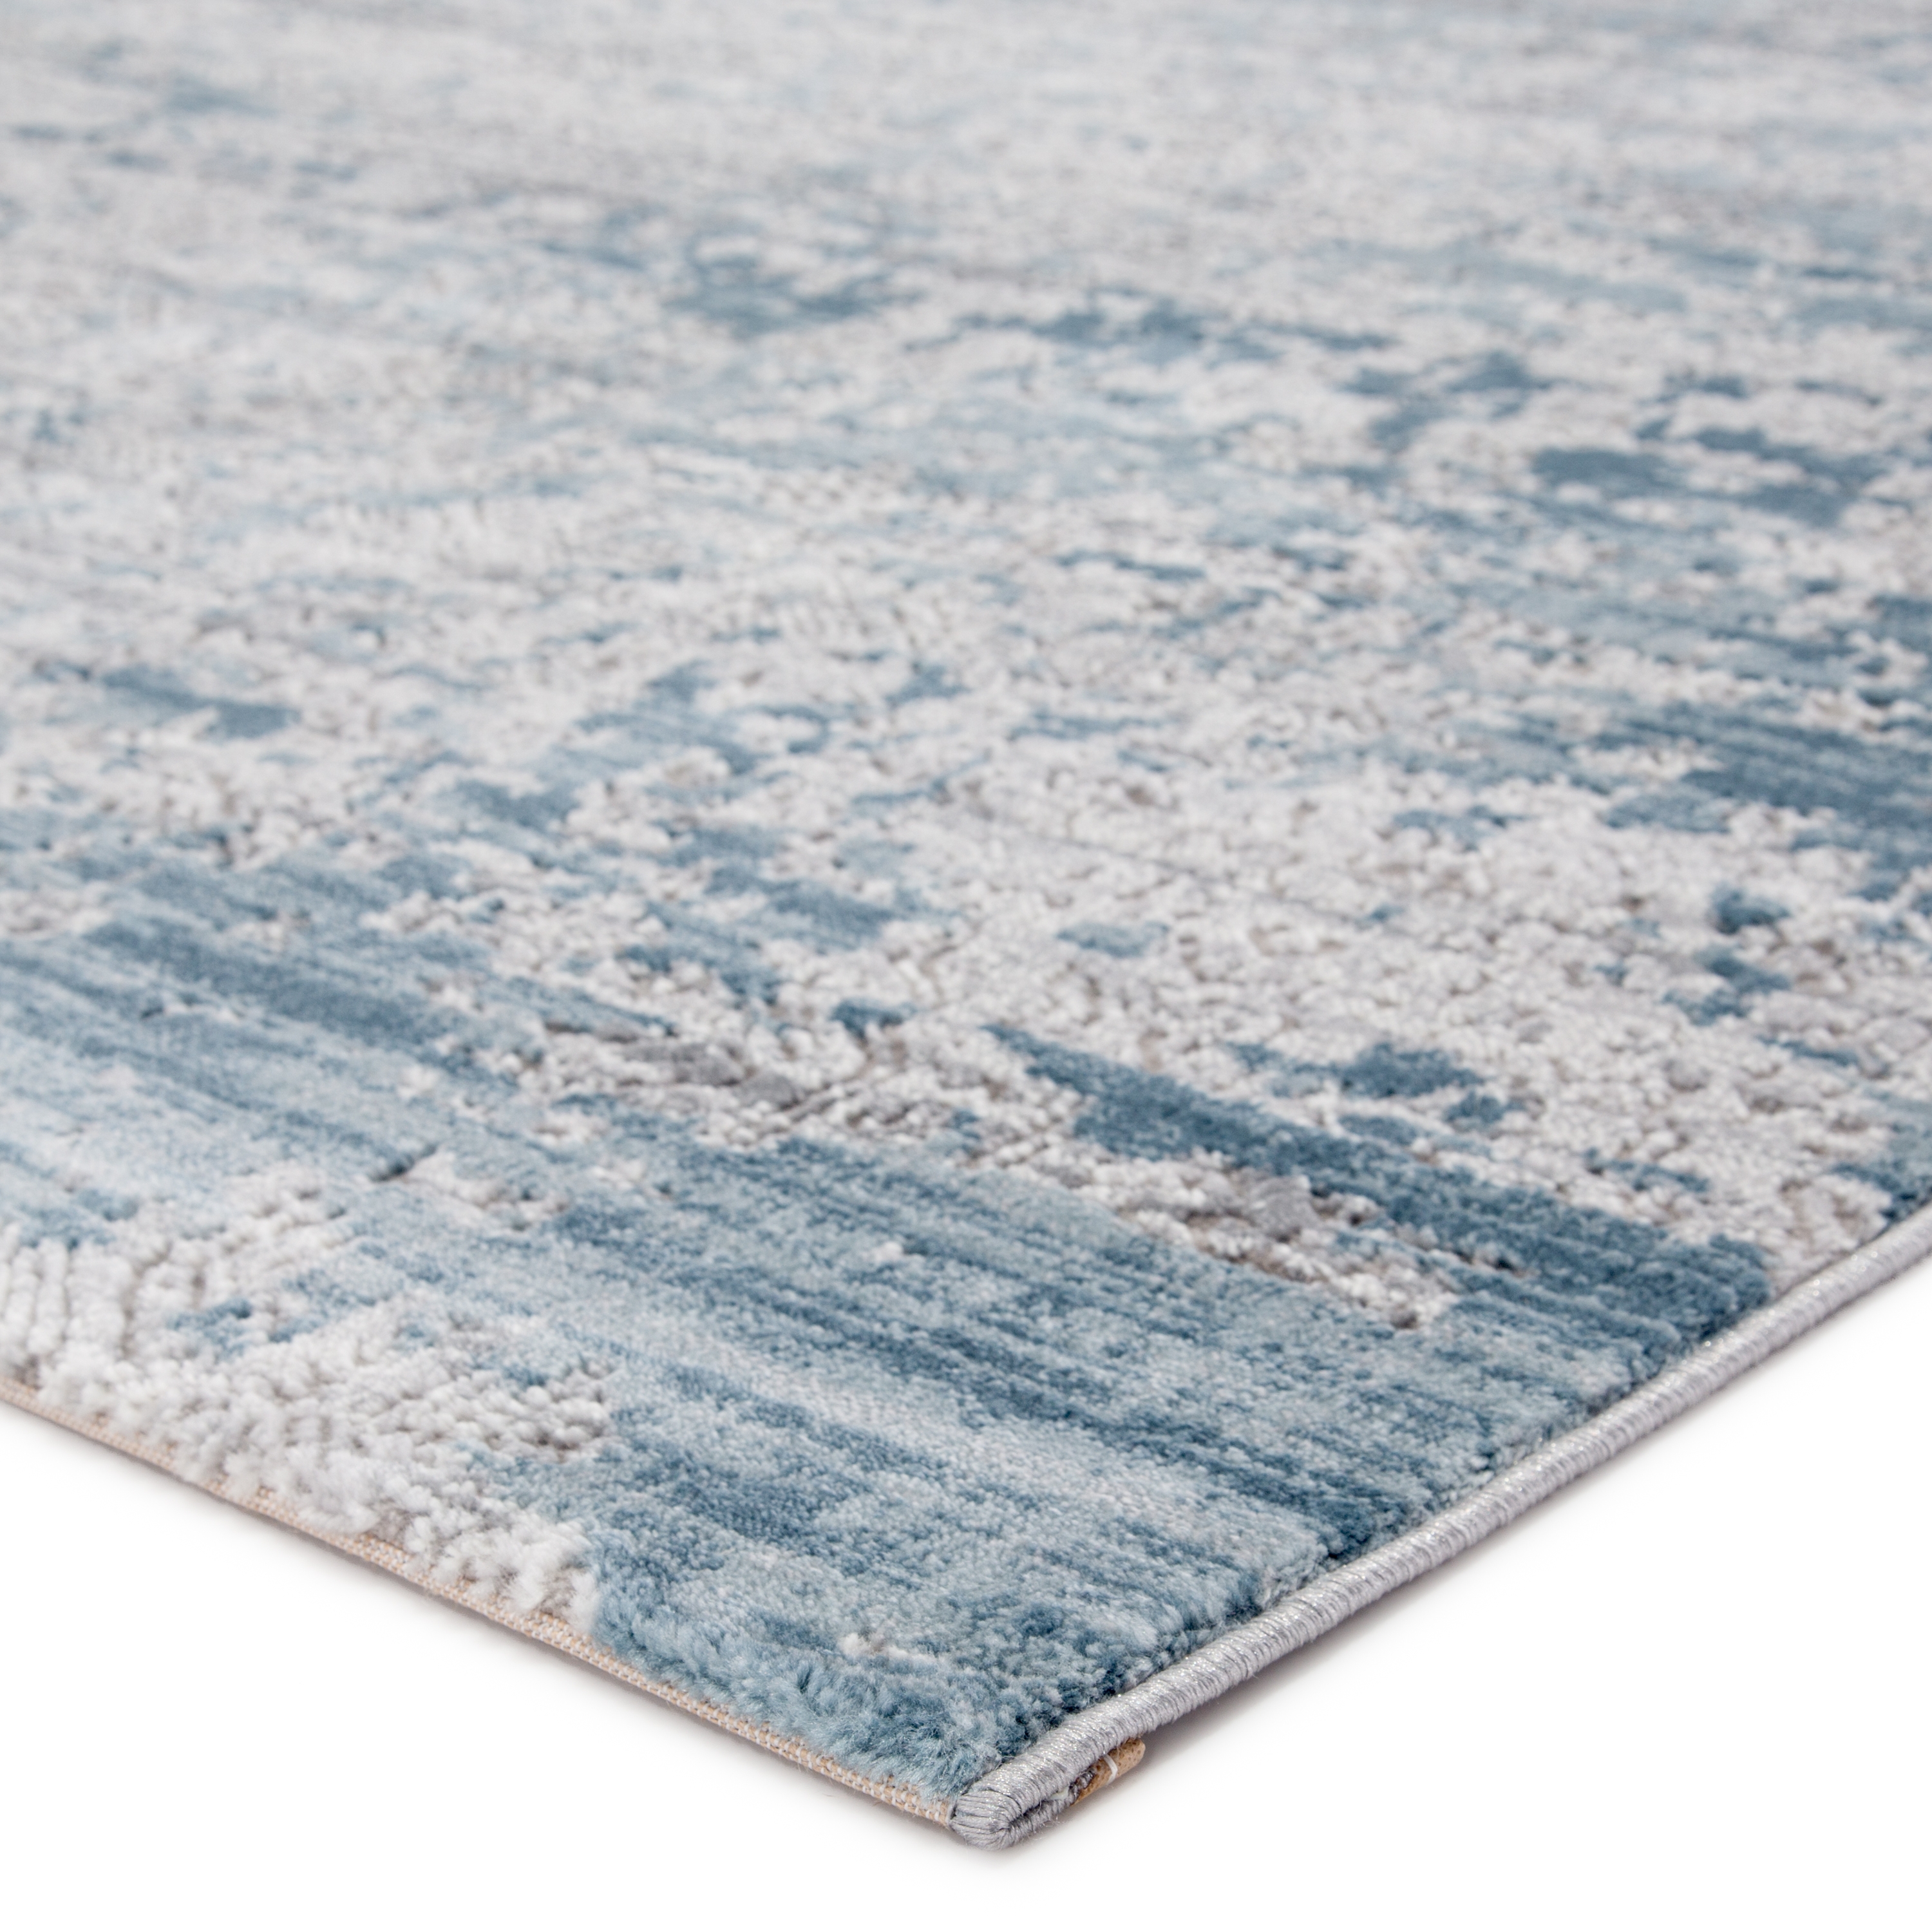 Skiway Medallion Silver/ Blue Area Rug (7'10"X10'2") - Image 1